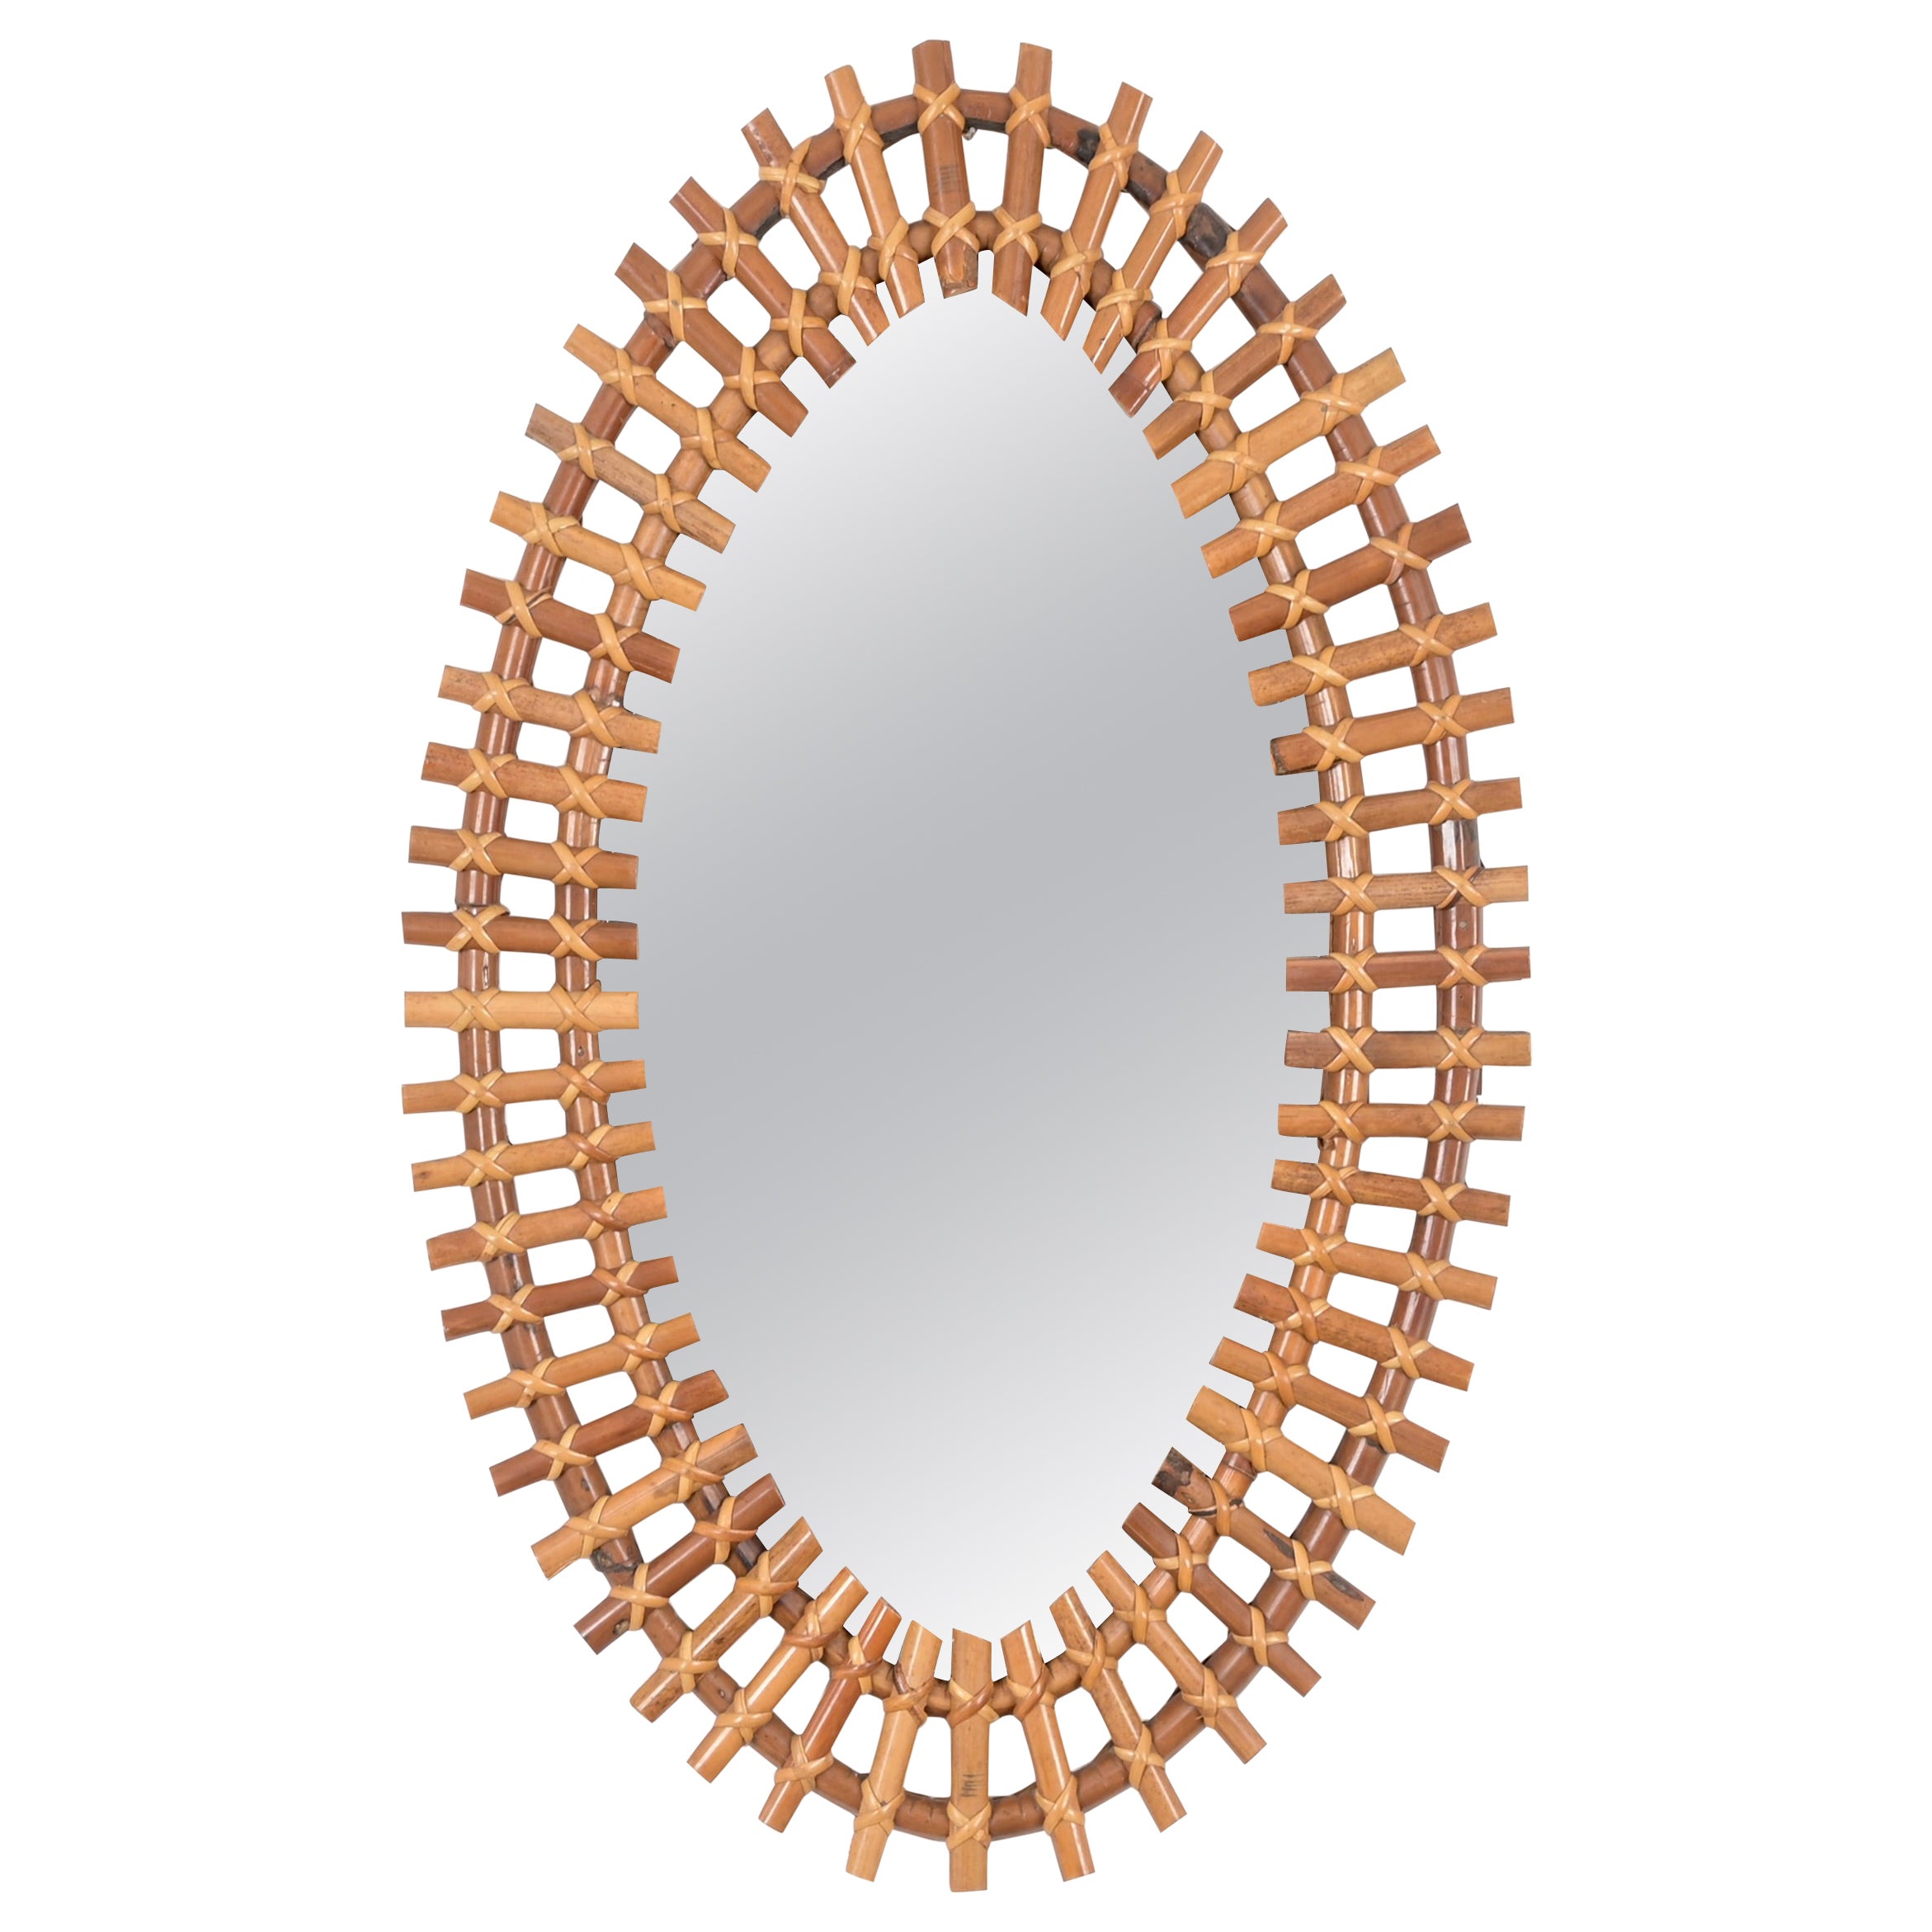 Midcentury French Riviera Oval Mirror in Rattan Wicker and Bamboo, Italy 1960s For Sale